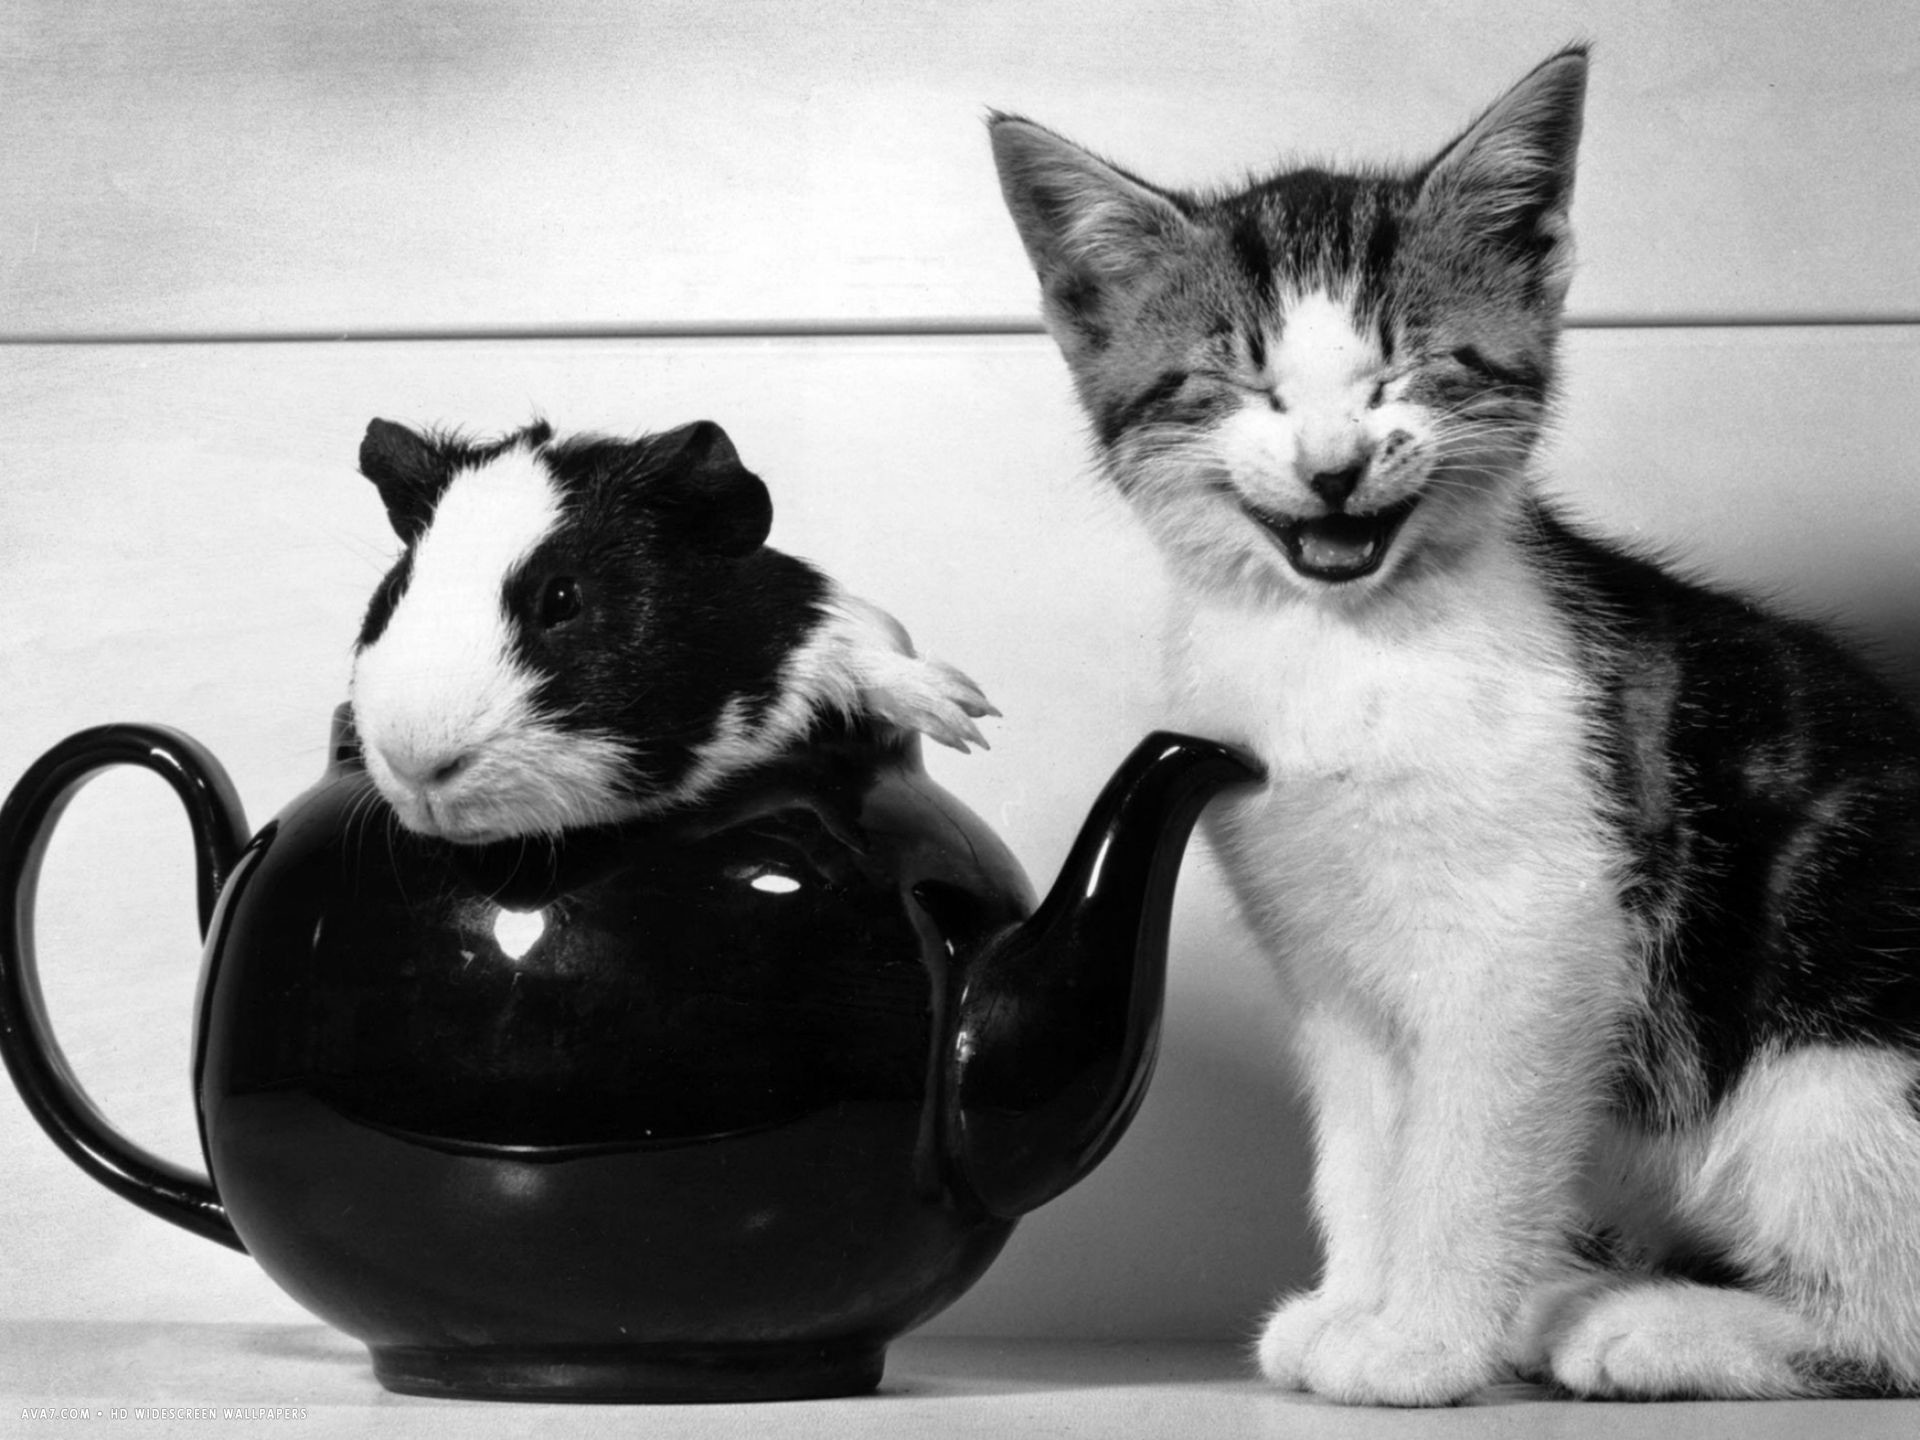 1920x1440 pinkie the guinea pig and perky the kitten tottenahm london september 1978